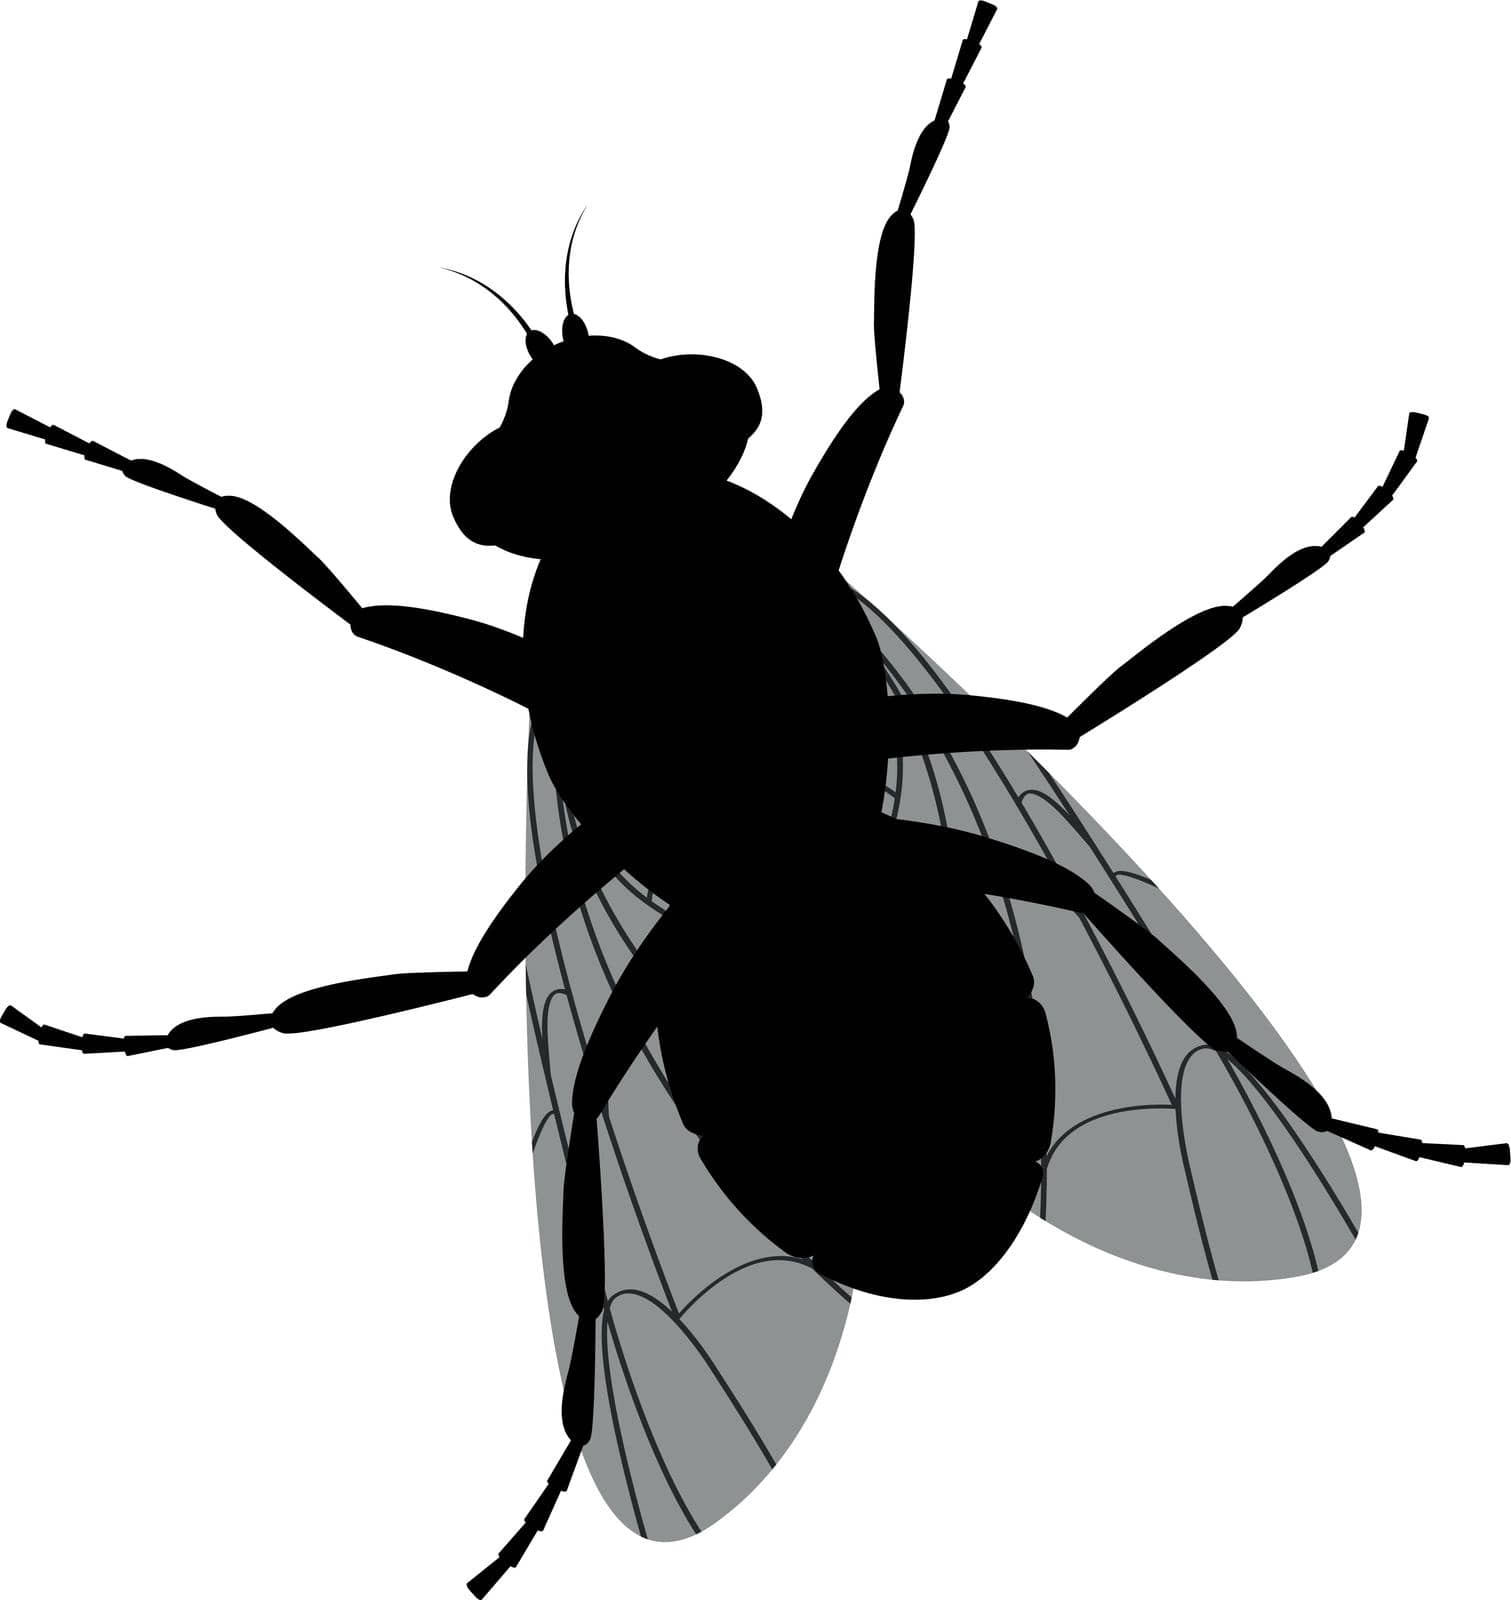 The silhouette of a fly. Fly top view. A flying insect. Vector illustration isolated on a white background by NastyaN